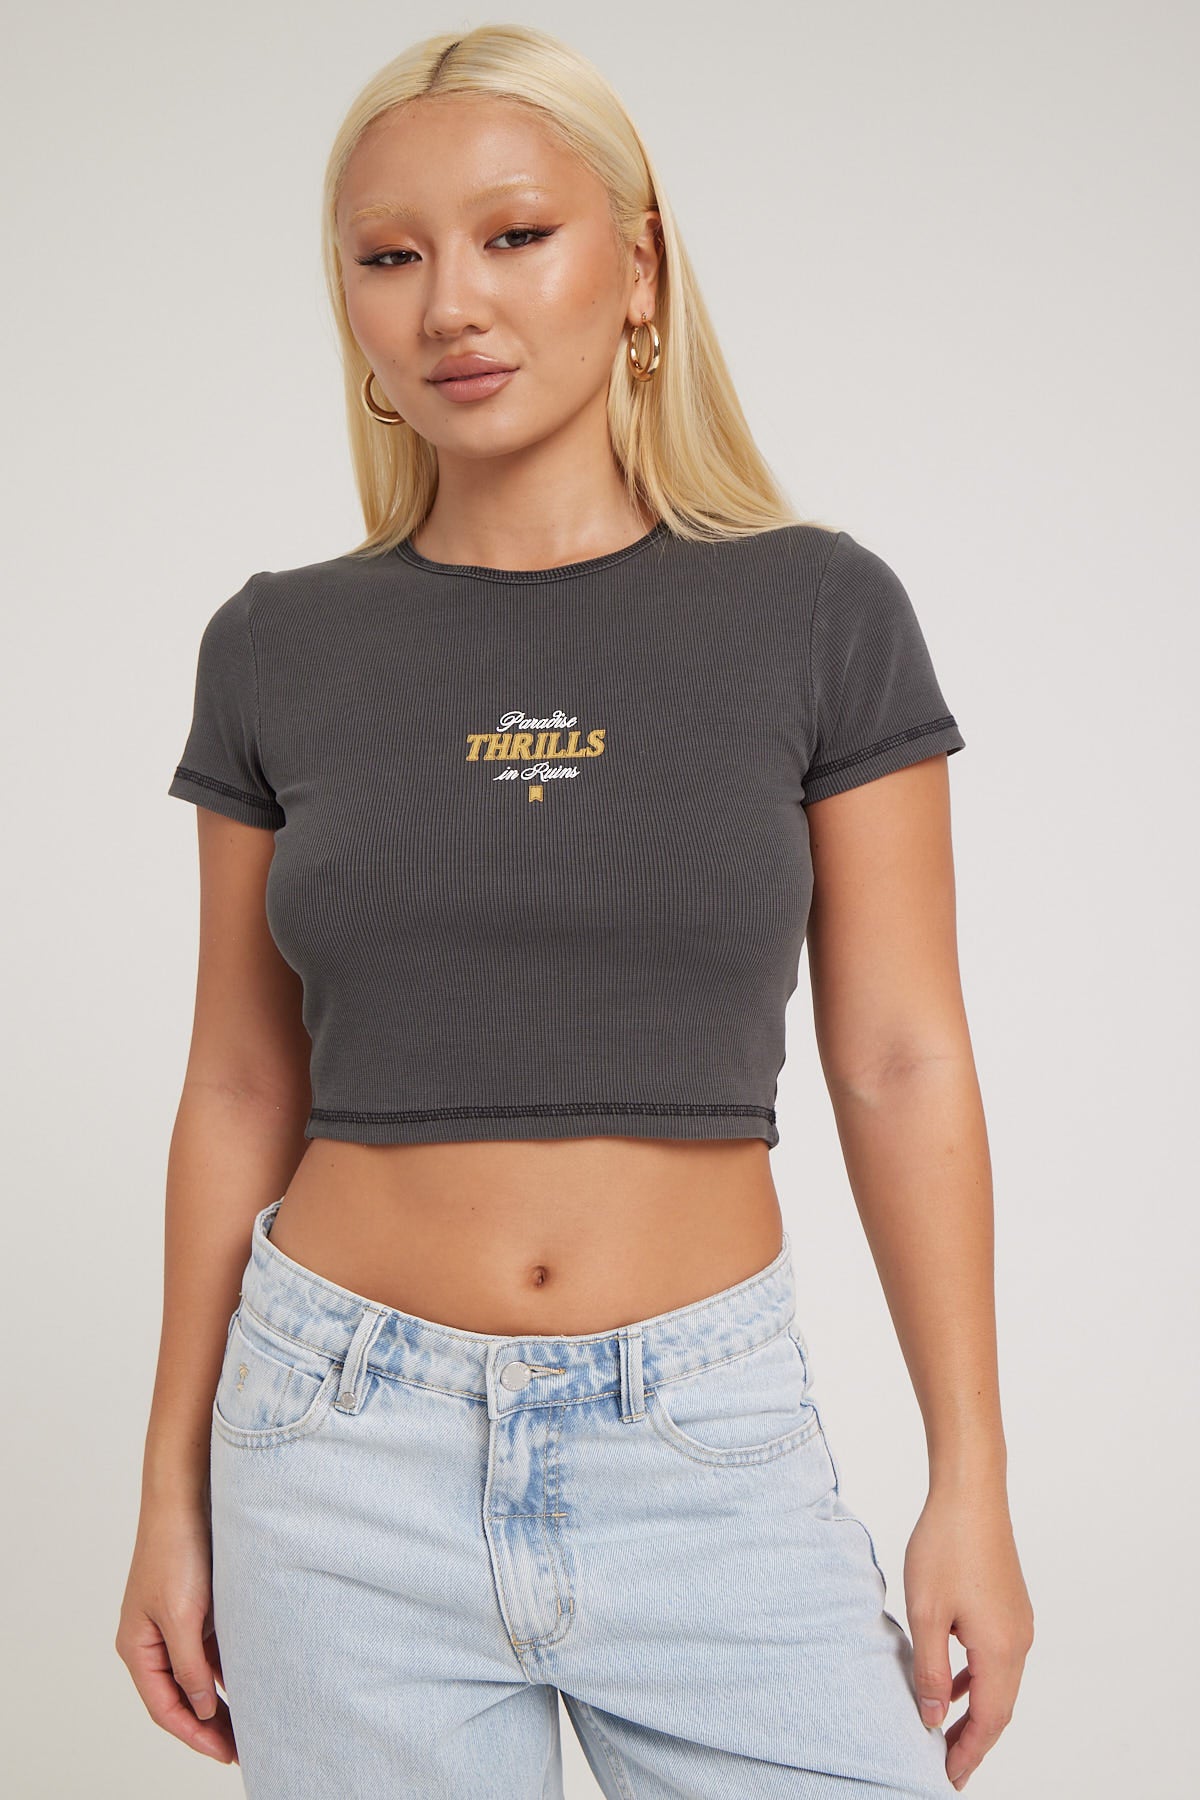 Thrills Sessions Baby Tee Merch Black